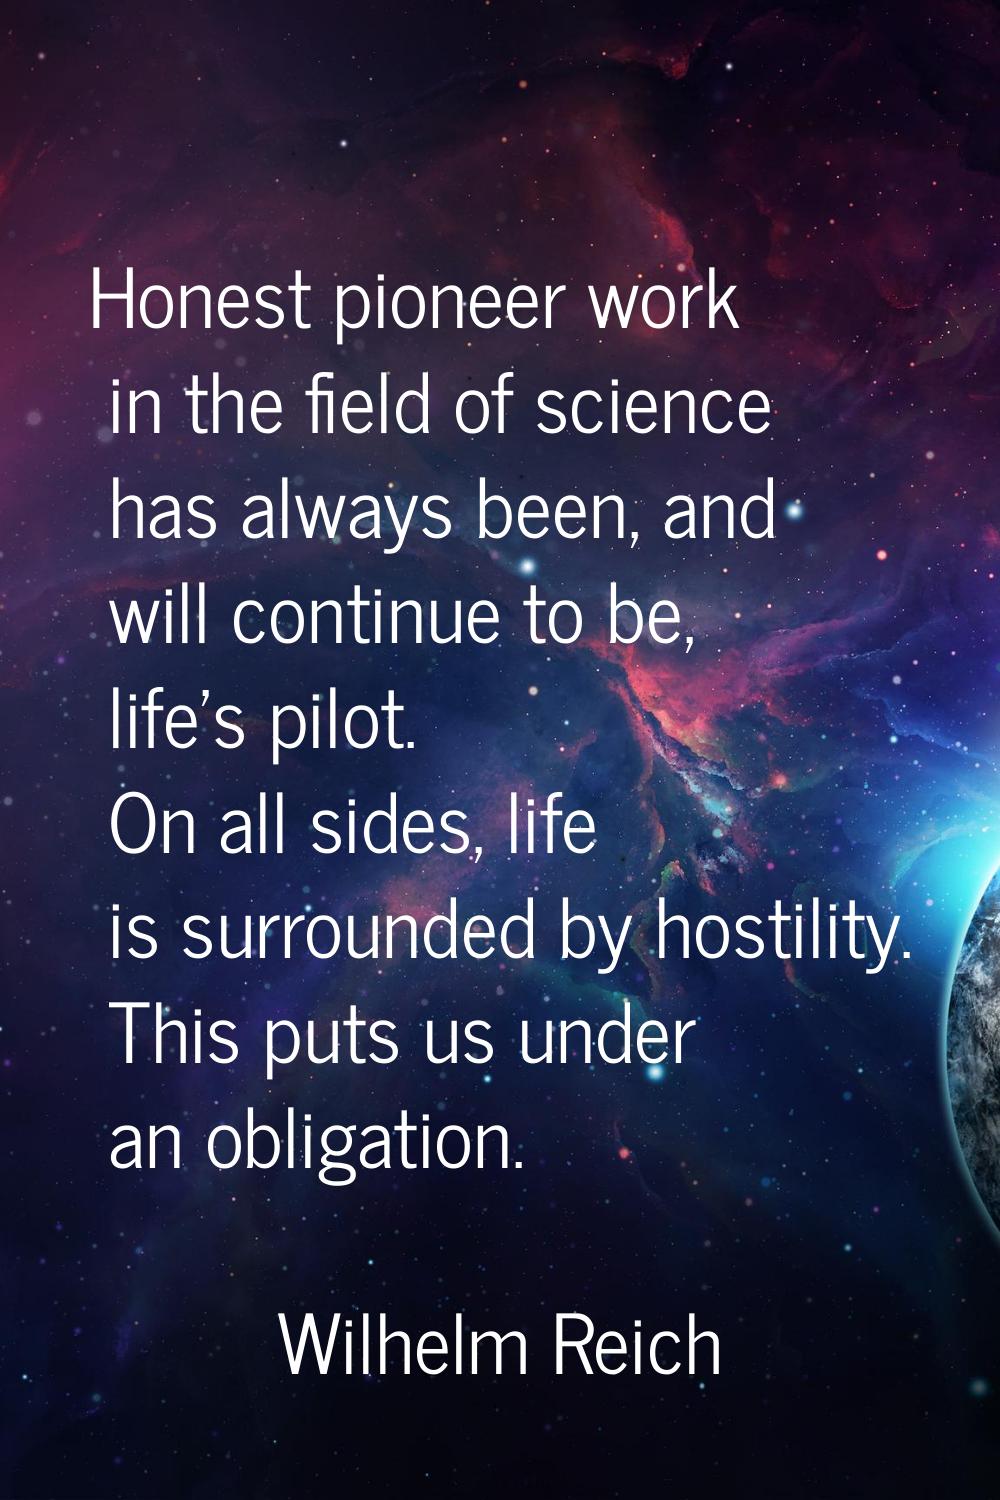 Honest pioneer work in the field of science has always been, and will continue to be, life's pilot.